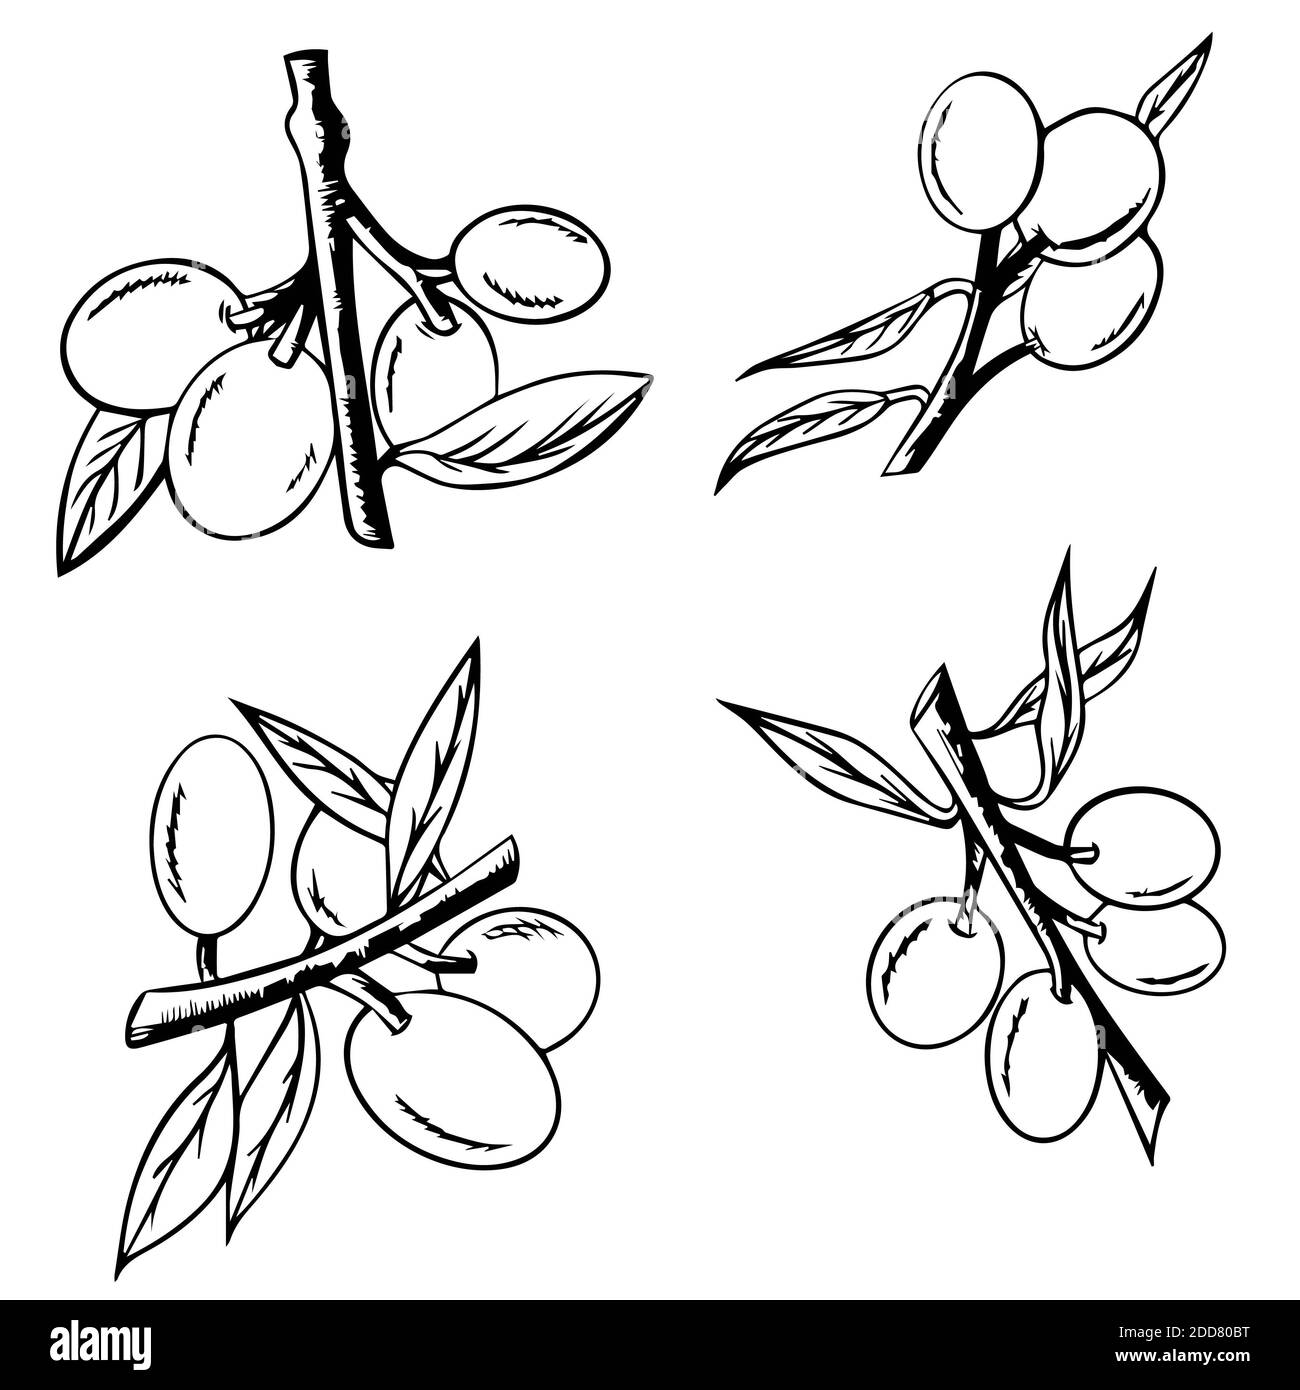 Sketched tree set of branch with olives, olive branches isolated over white background, vector hand drawn illustration. Symbol or logo for olive oil Stock Photo